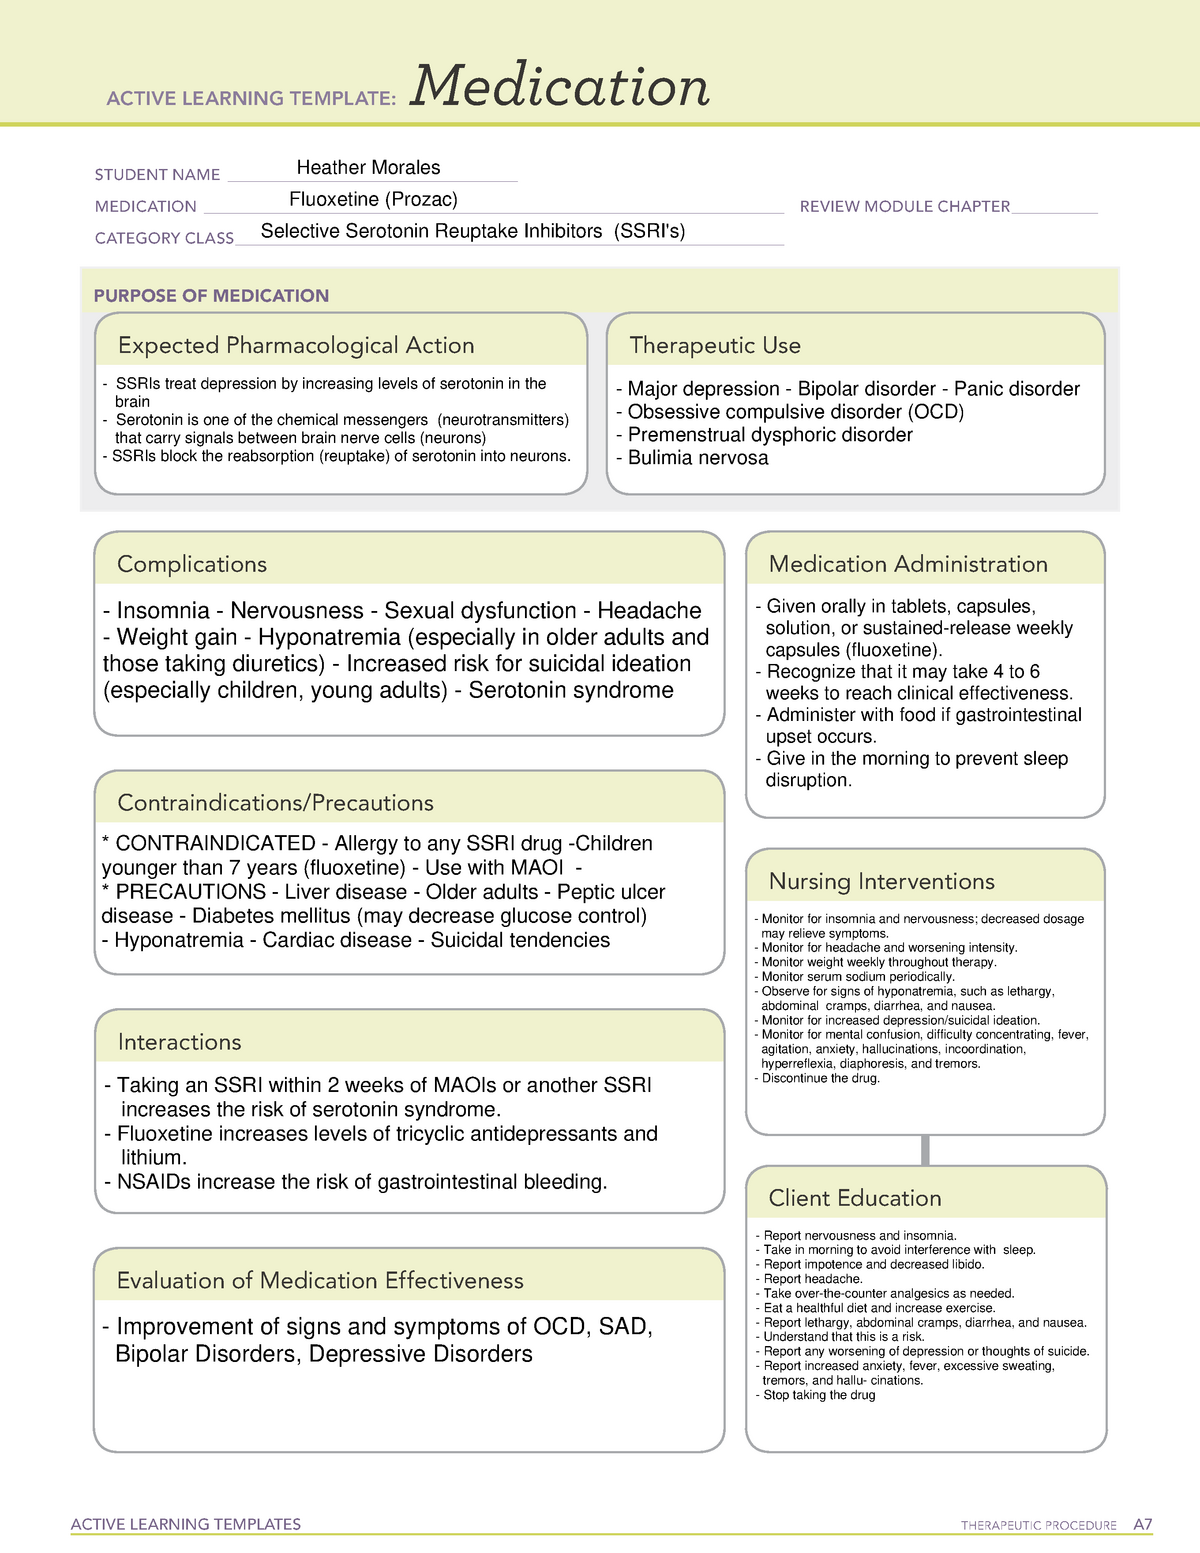 Med Template Fluoxetine 3 ACTIVE LEARNING TEMPLATES